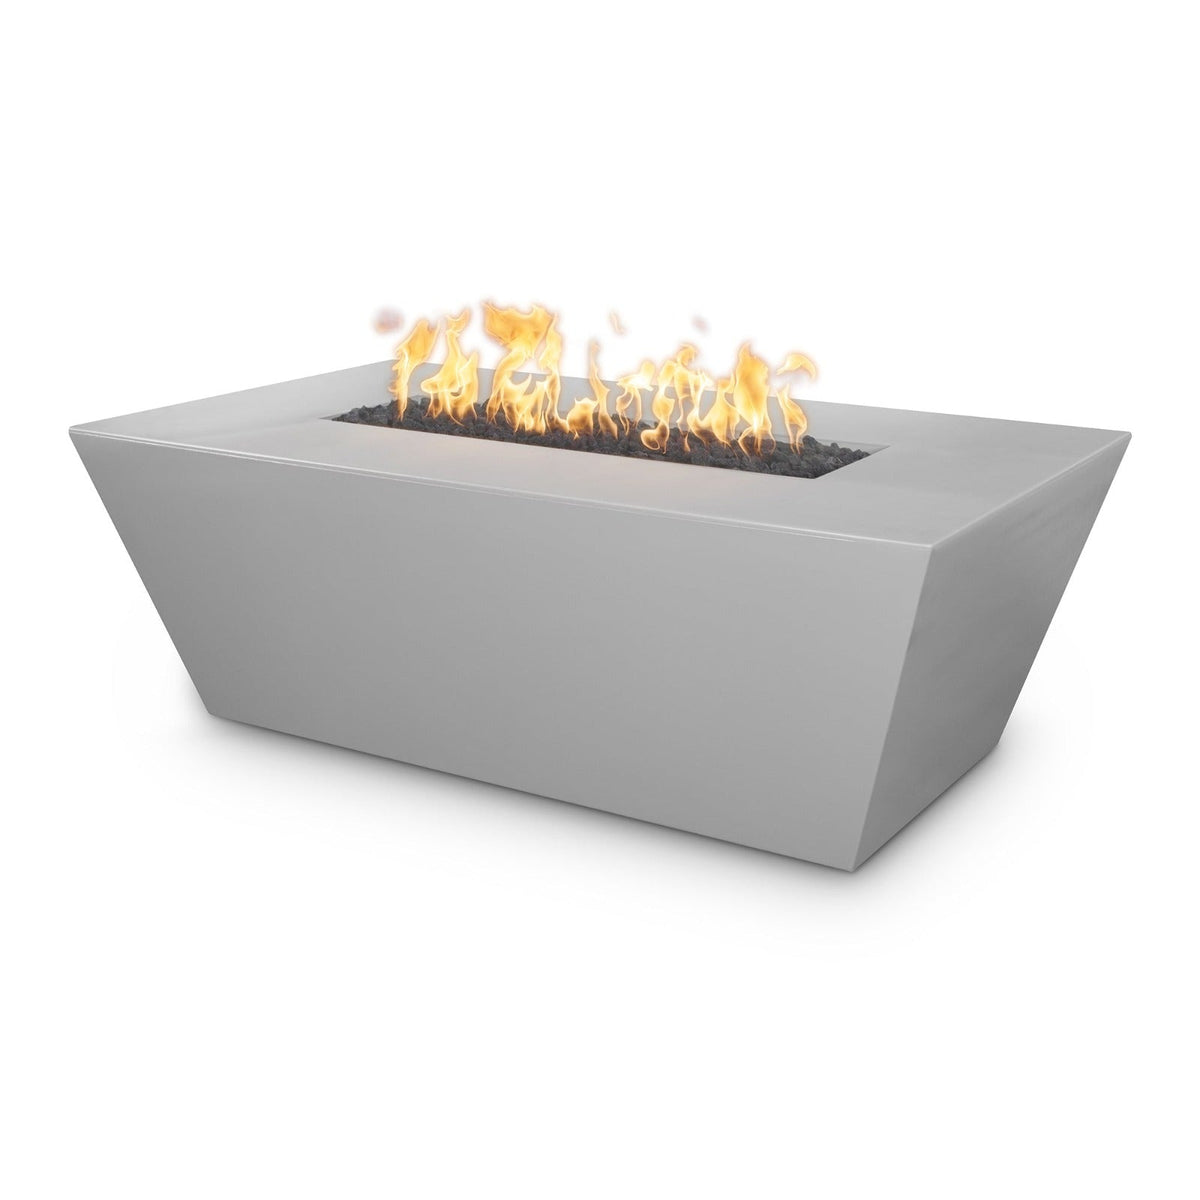 The Outdoor Plus Fire Features Natural Gray (-NGY) / Match Lit Ignition / Liquid Propane The Outdoor Plus 60&quot; Rectangular Angelus Fire Pit in Solid Concrete Finishes - GFRC Concrete / OPT-AGLGF60, OPT-AGLGF60FSML, OPT-AGLGF60FSEN, OPT-AGLGF60E12V, OPT-AGLGF60EKIT